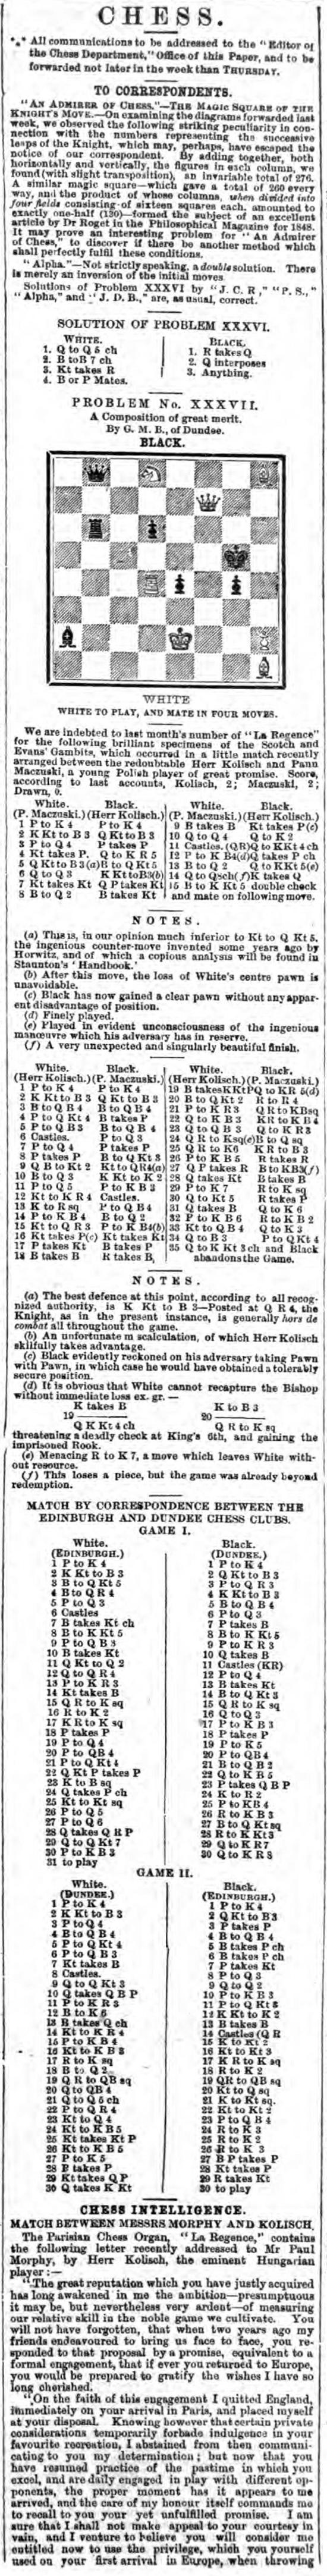 1863.04.13-01 Dundee Courier and Argus.jpg